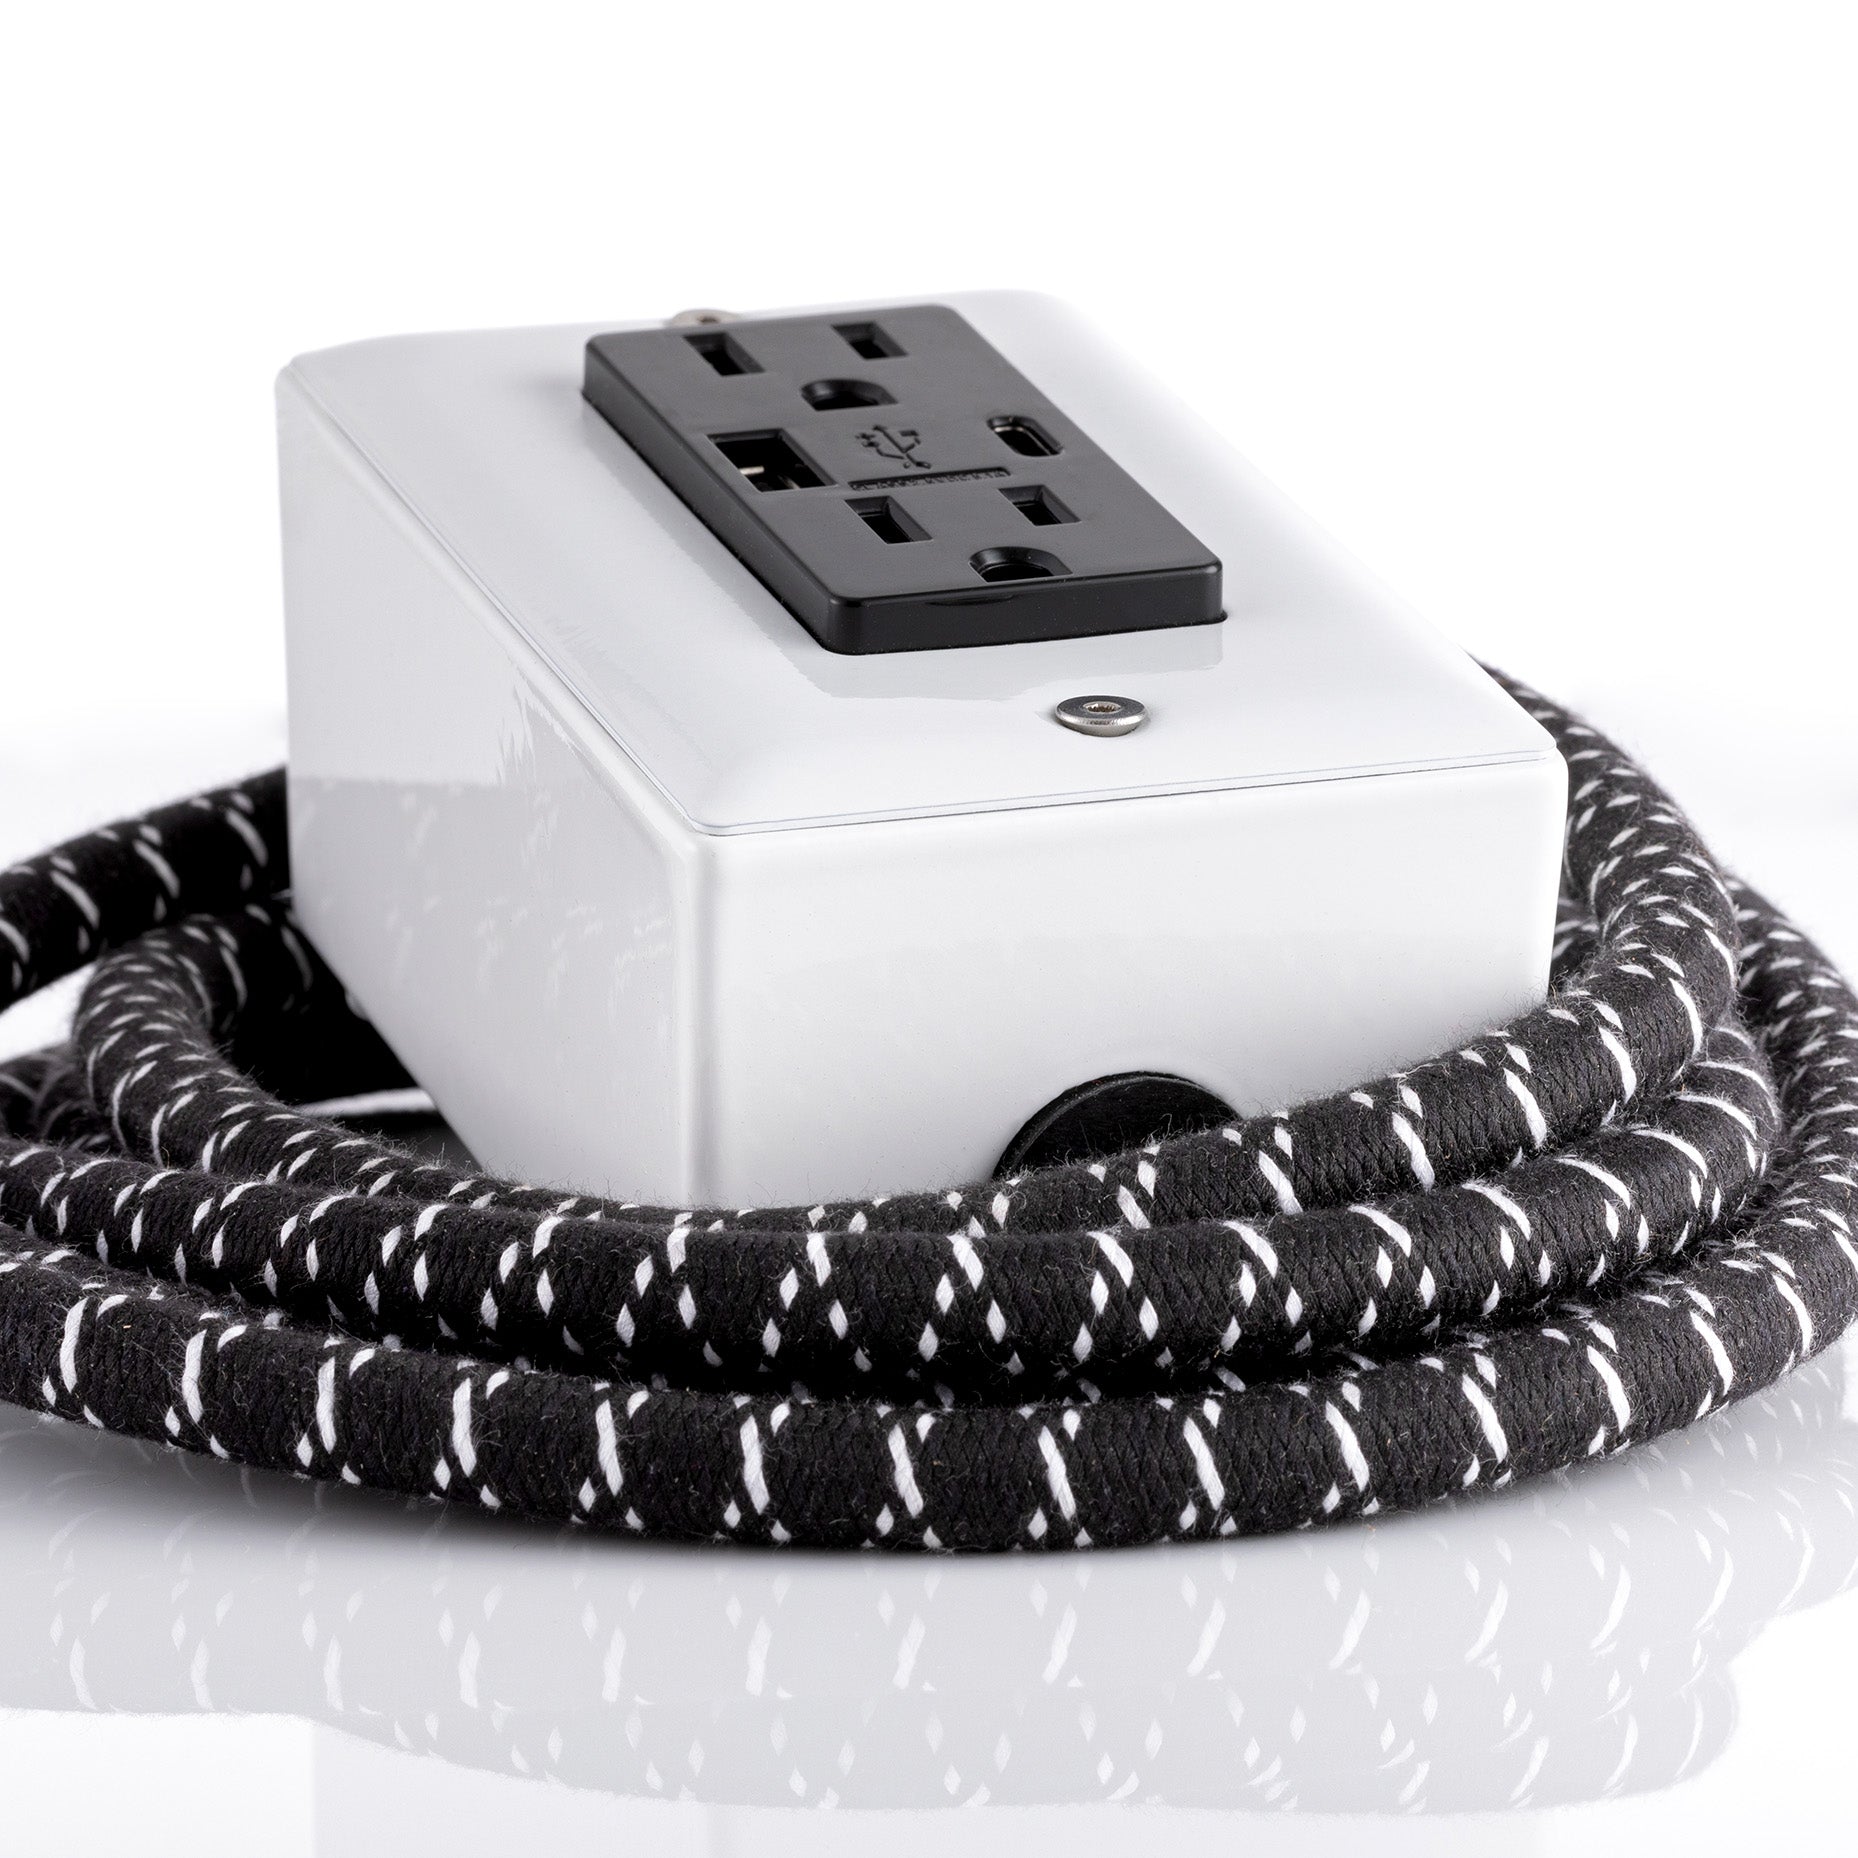 New! The First Smart Chip USB Type C® Extension Cord - 8' Extō USBA/USBC Port, Dual-Outlet Power Cord